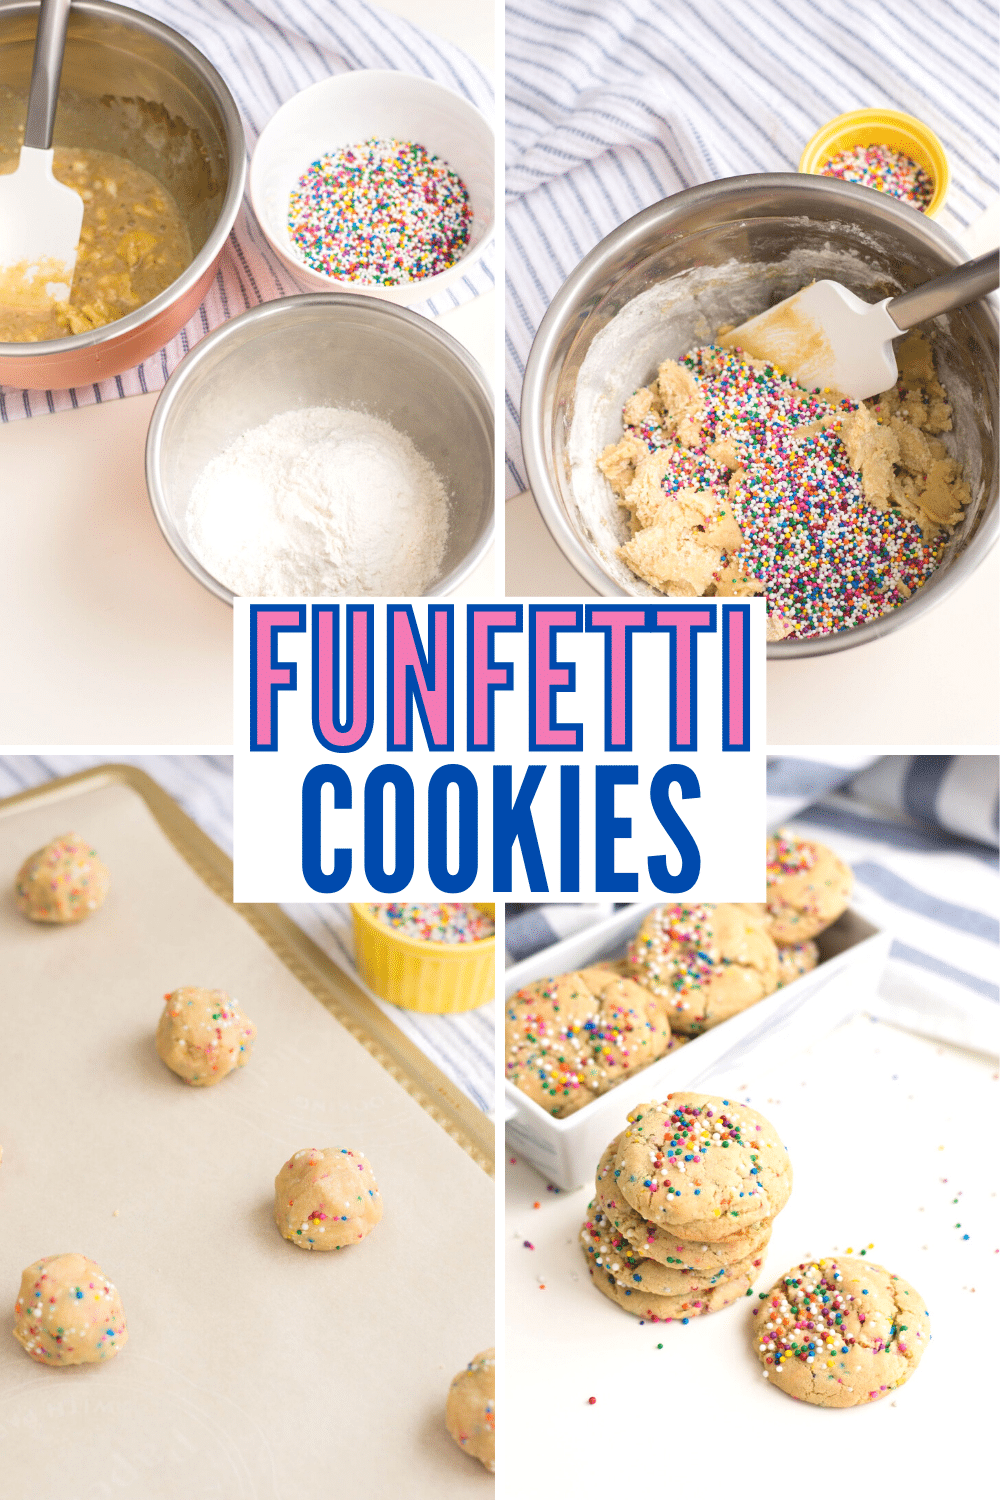 Funfetti Cookies are a perfect fun and festive treat to make with your kids. They're super easy to make and perfectly soft and chewy. #funfetticookies #cookies #funfetti #recipe via @wondermomwannab